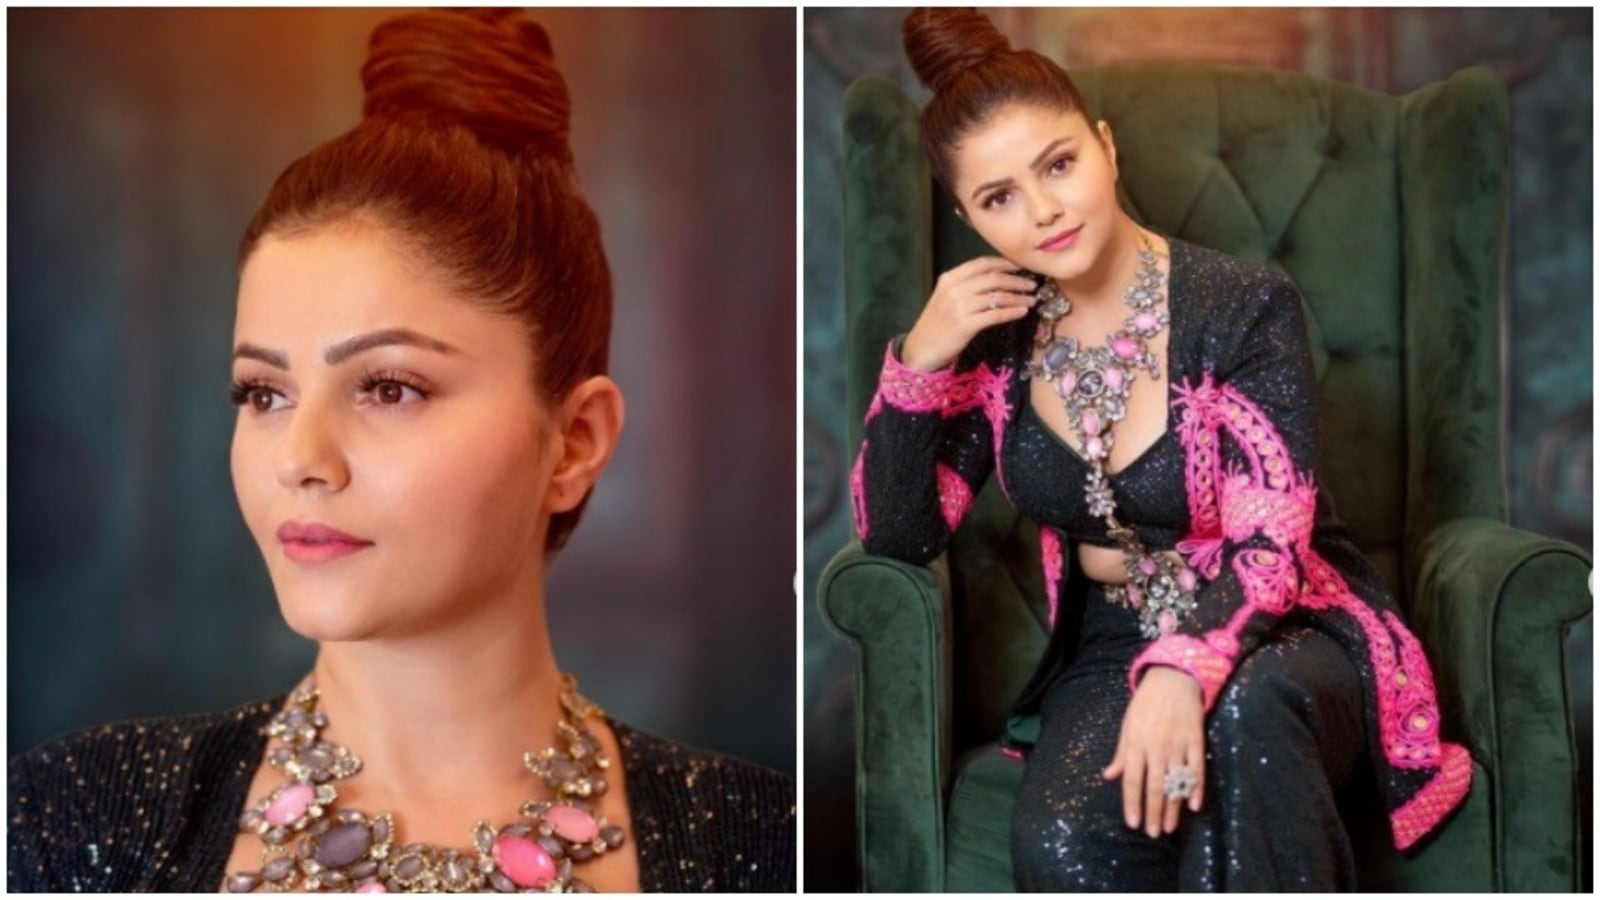 Colourblocking And Rubina Dilaik Go Hand-In-Hand When It Comes To